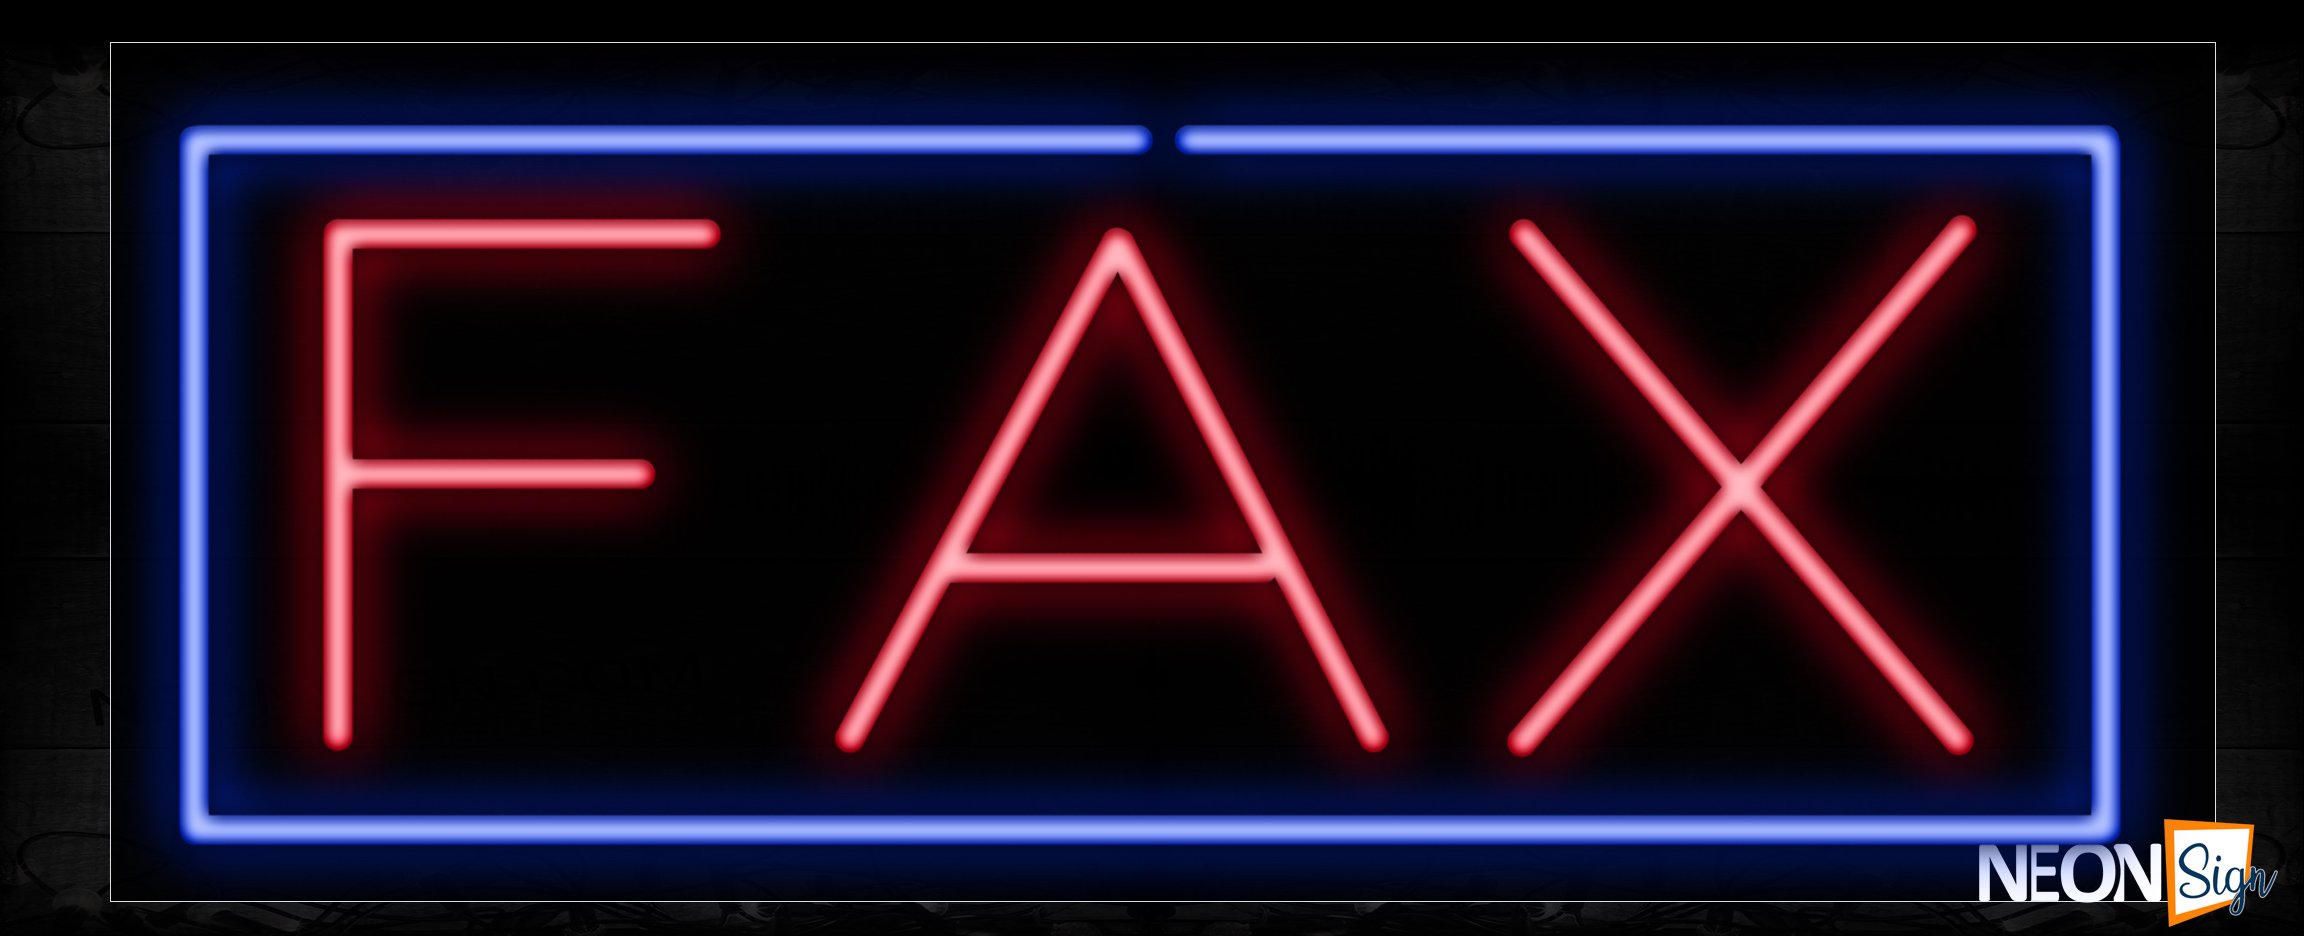 Image of 10240 Fax in red with blue border Neon Sign_13x32 Black Backing